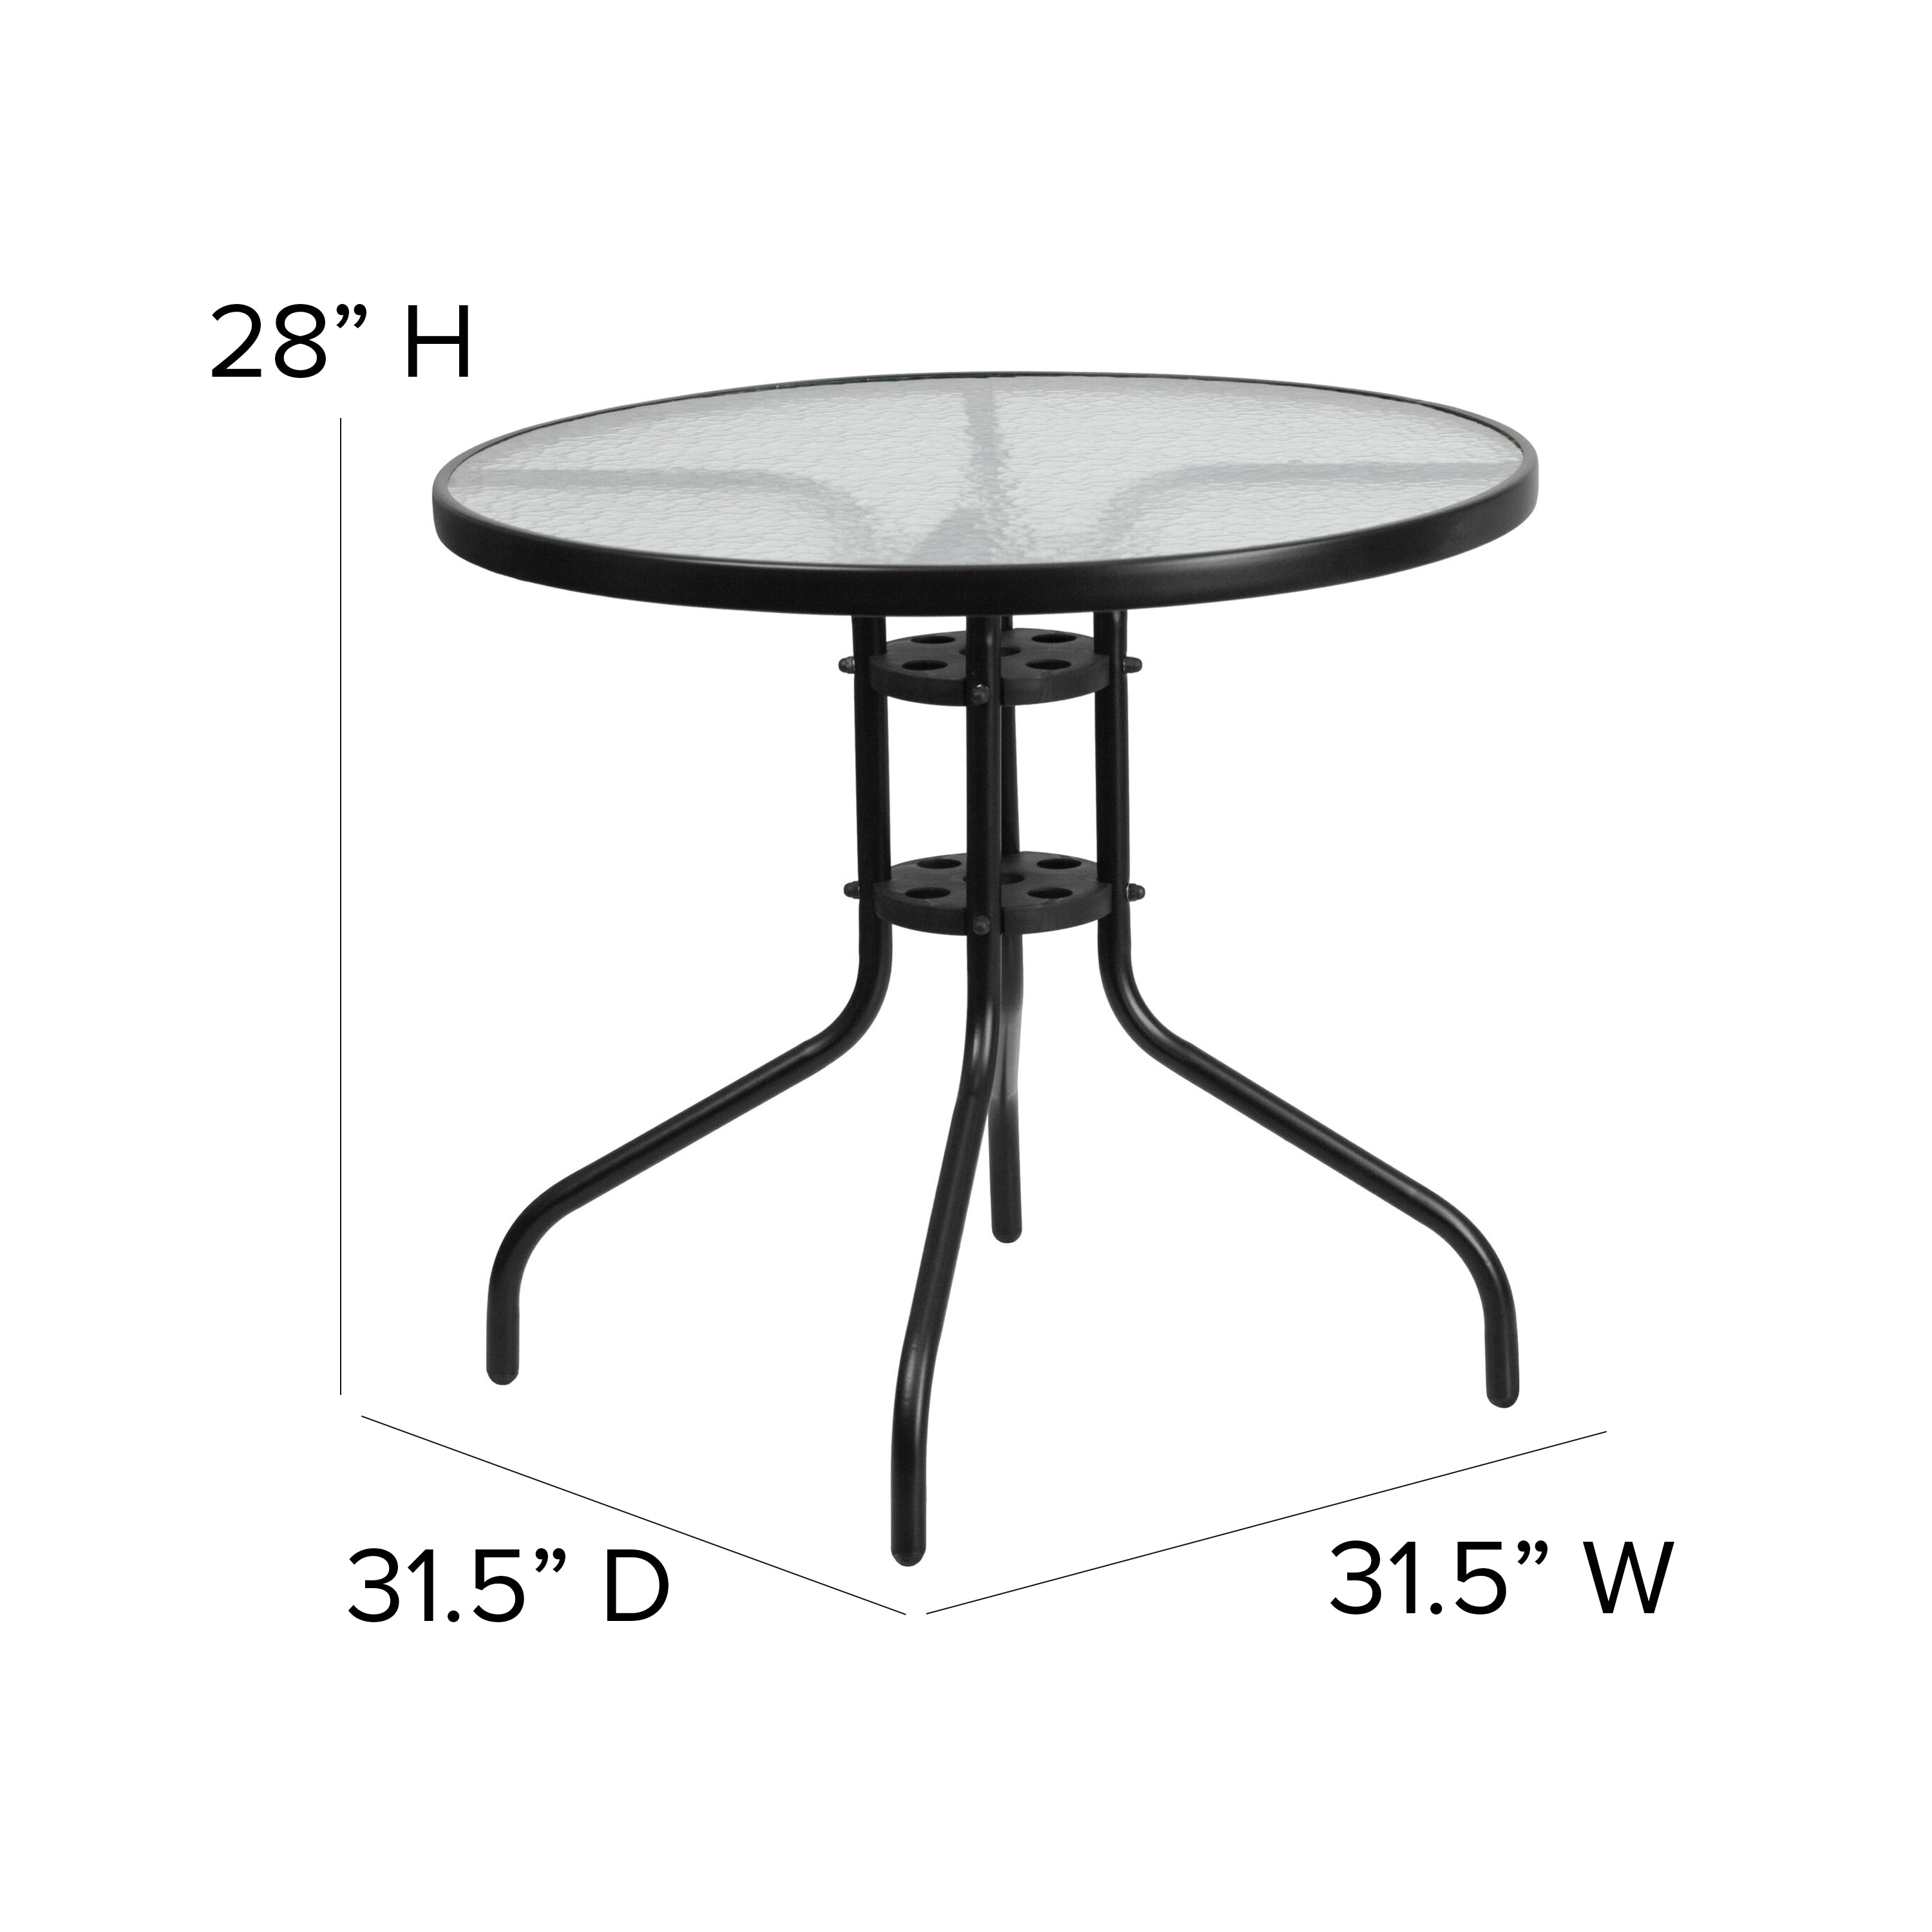 Brazos 5 Piece Outdoor Patio Dining Set - Tempered Glass Patio Table, 4 Flex Comfort Stack Chairs-Glass Patio Table and Chair Set-Flash Furniture-Wall2Wall Furnishings